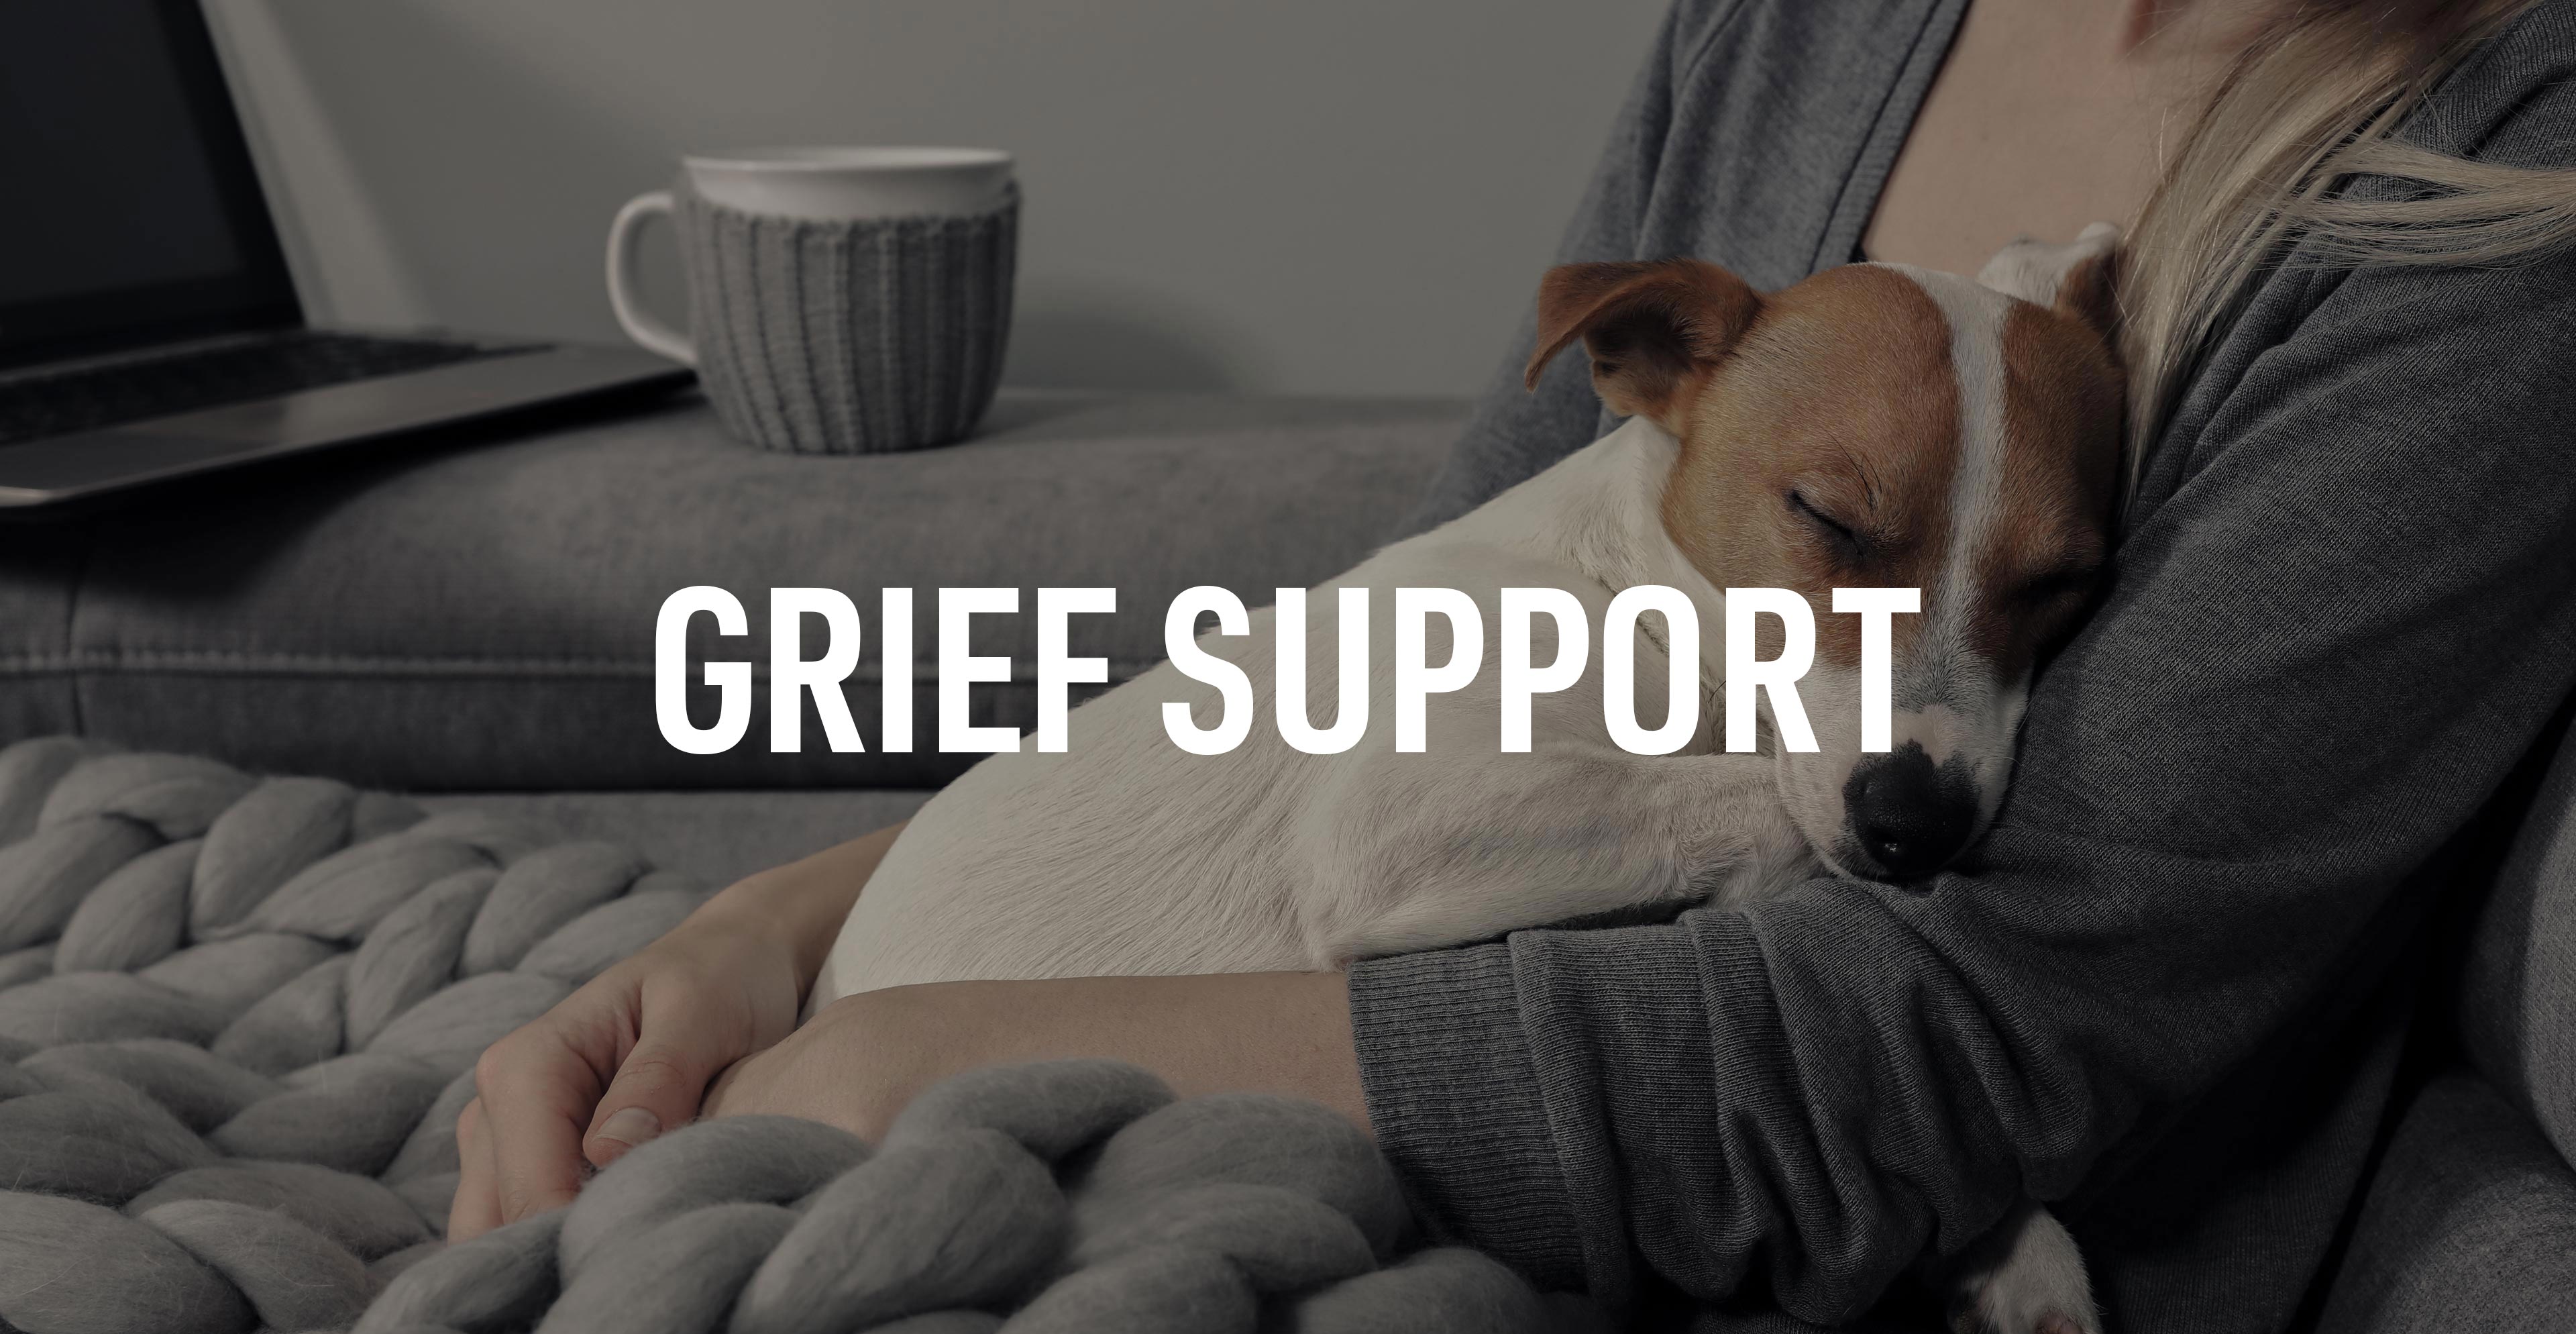 Grief Support Header Image of Sleeping Dog on Woman's Lap